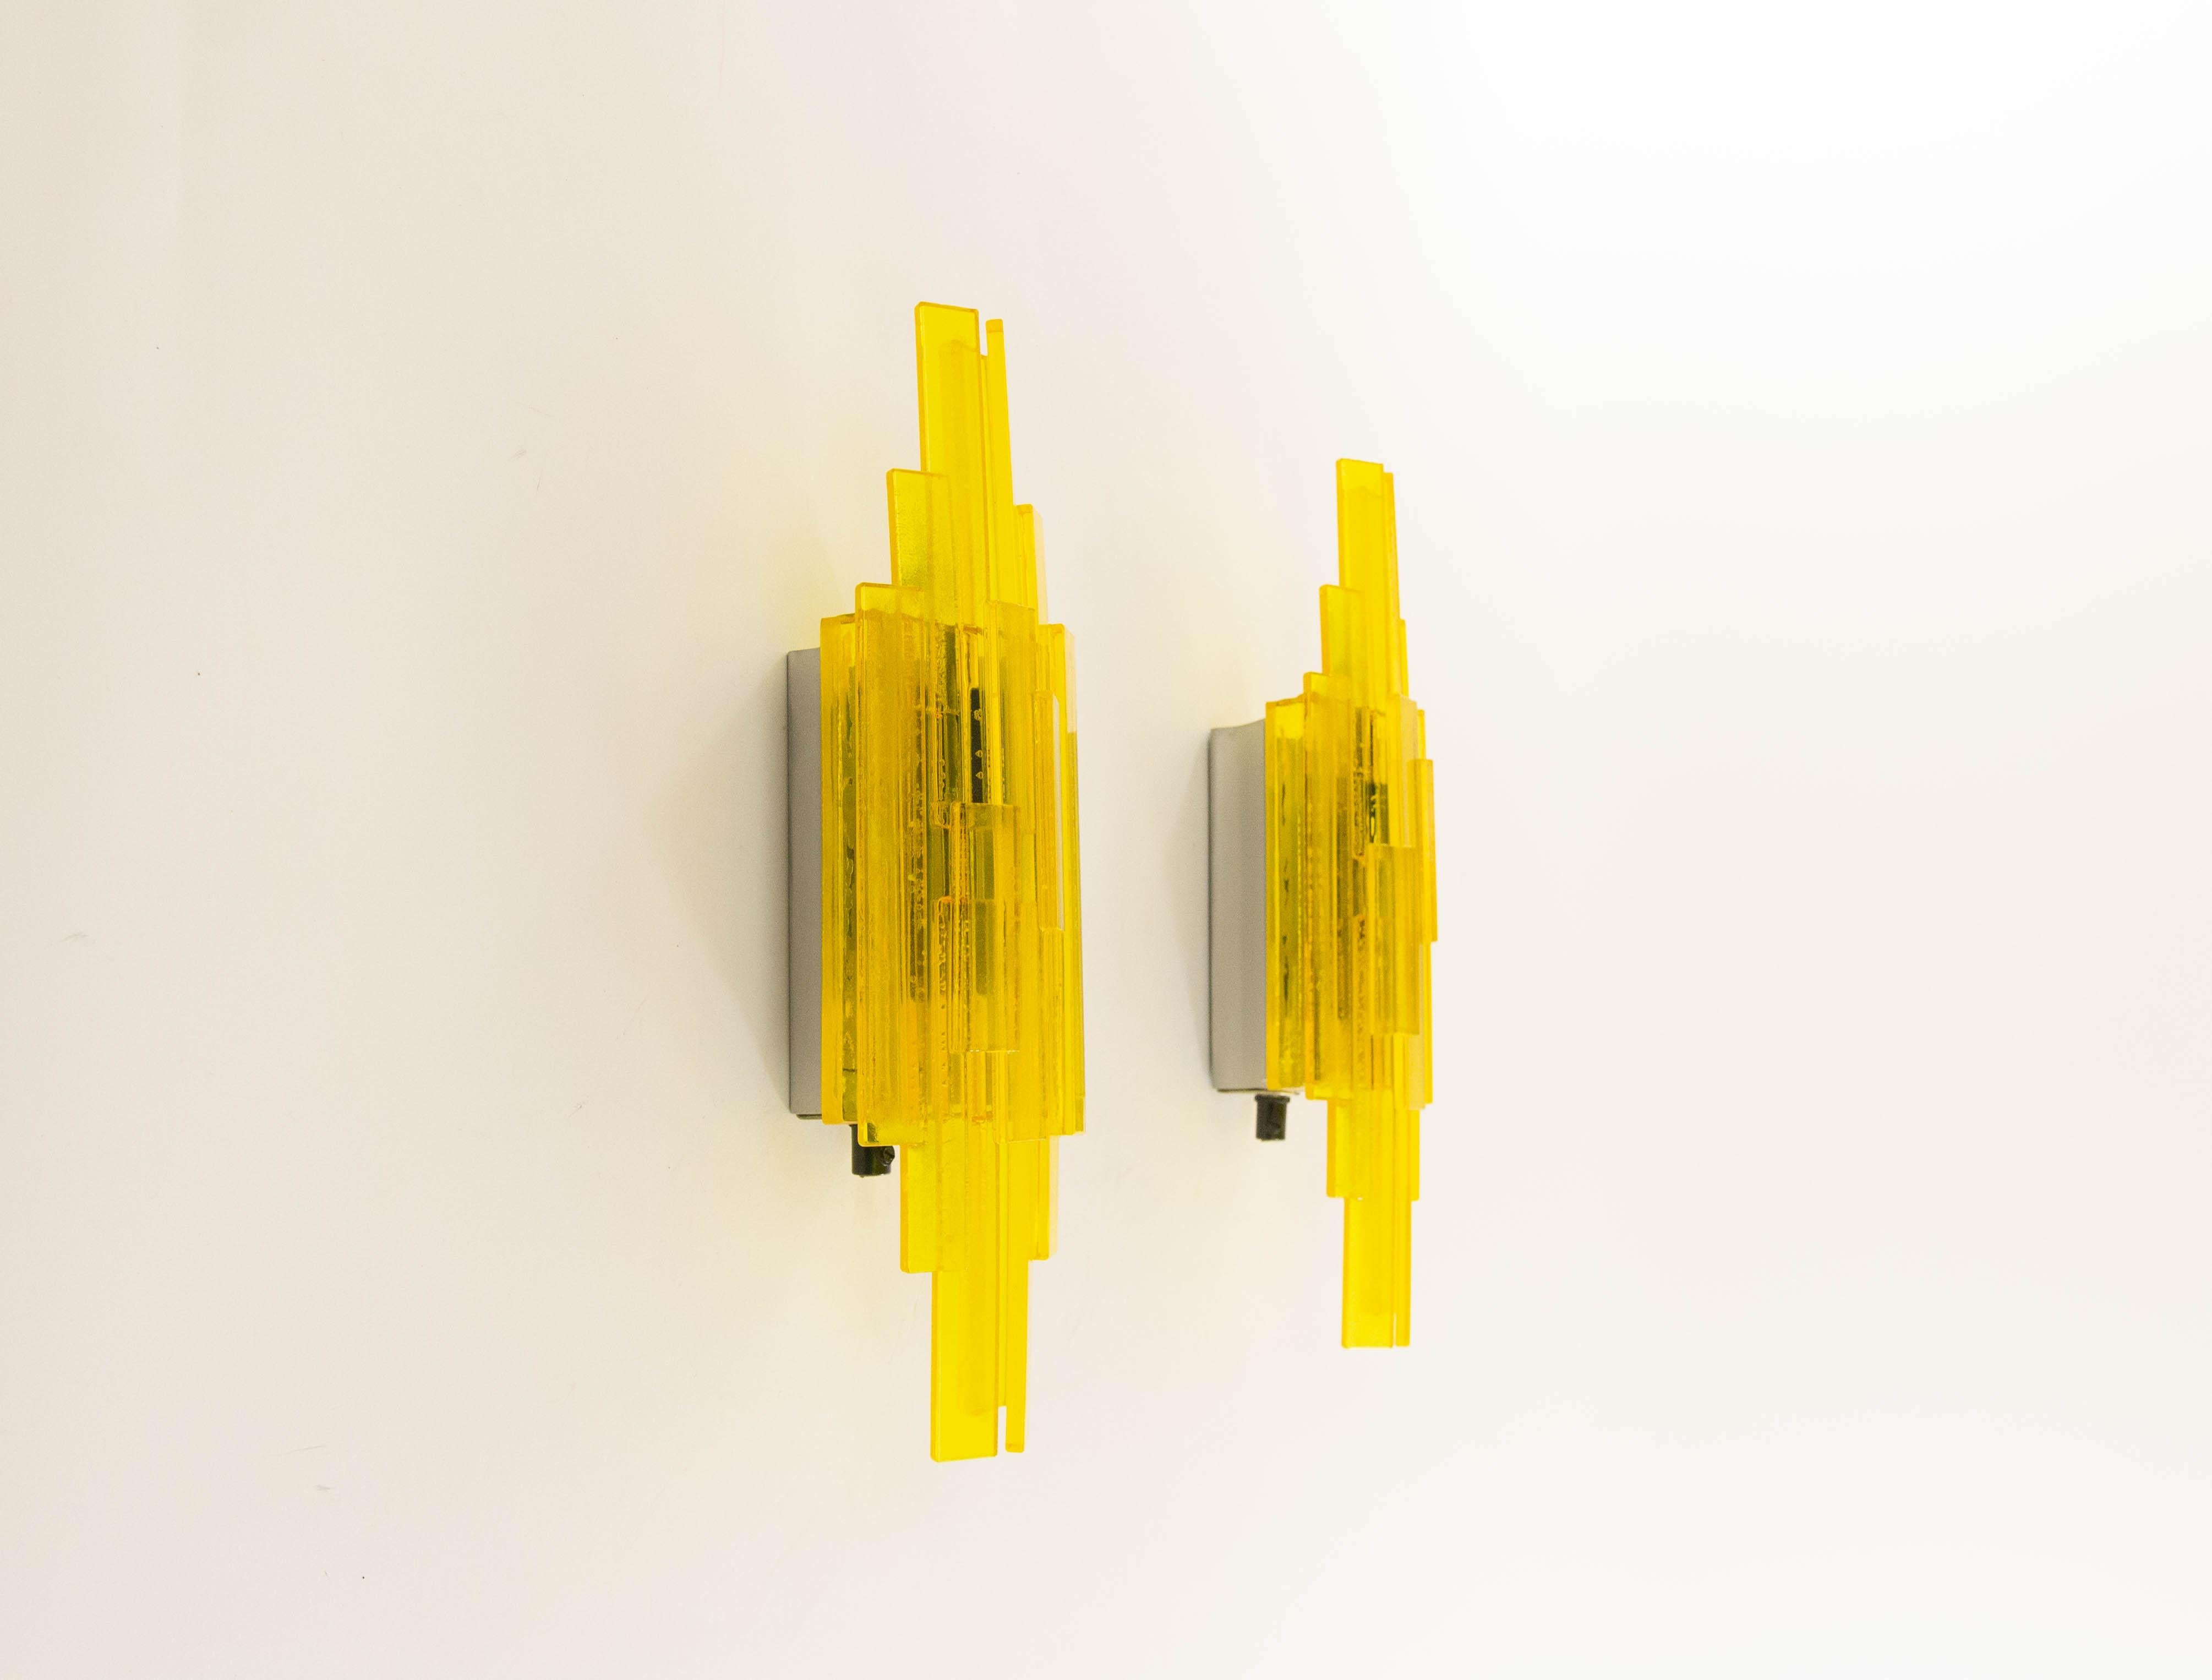 A pair of yellow handmade acrylic wall lamps. The sconces were designed by Claus Bolby and manufactured by his own company, Cebo Industri. By experimenting Bolby discovered a technique allowing him to introduce bubbles into the acrylic, which adds a